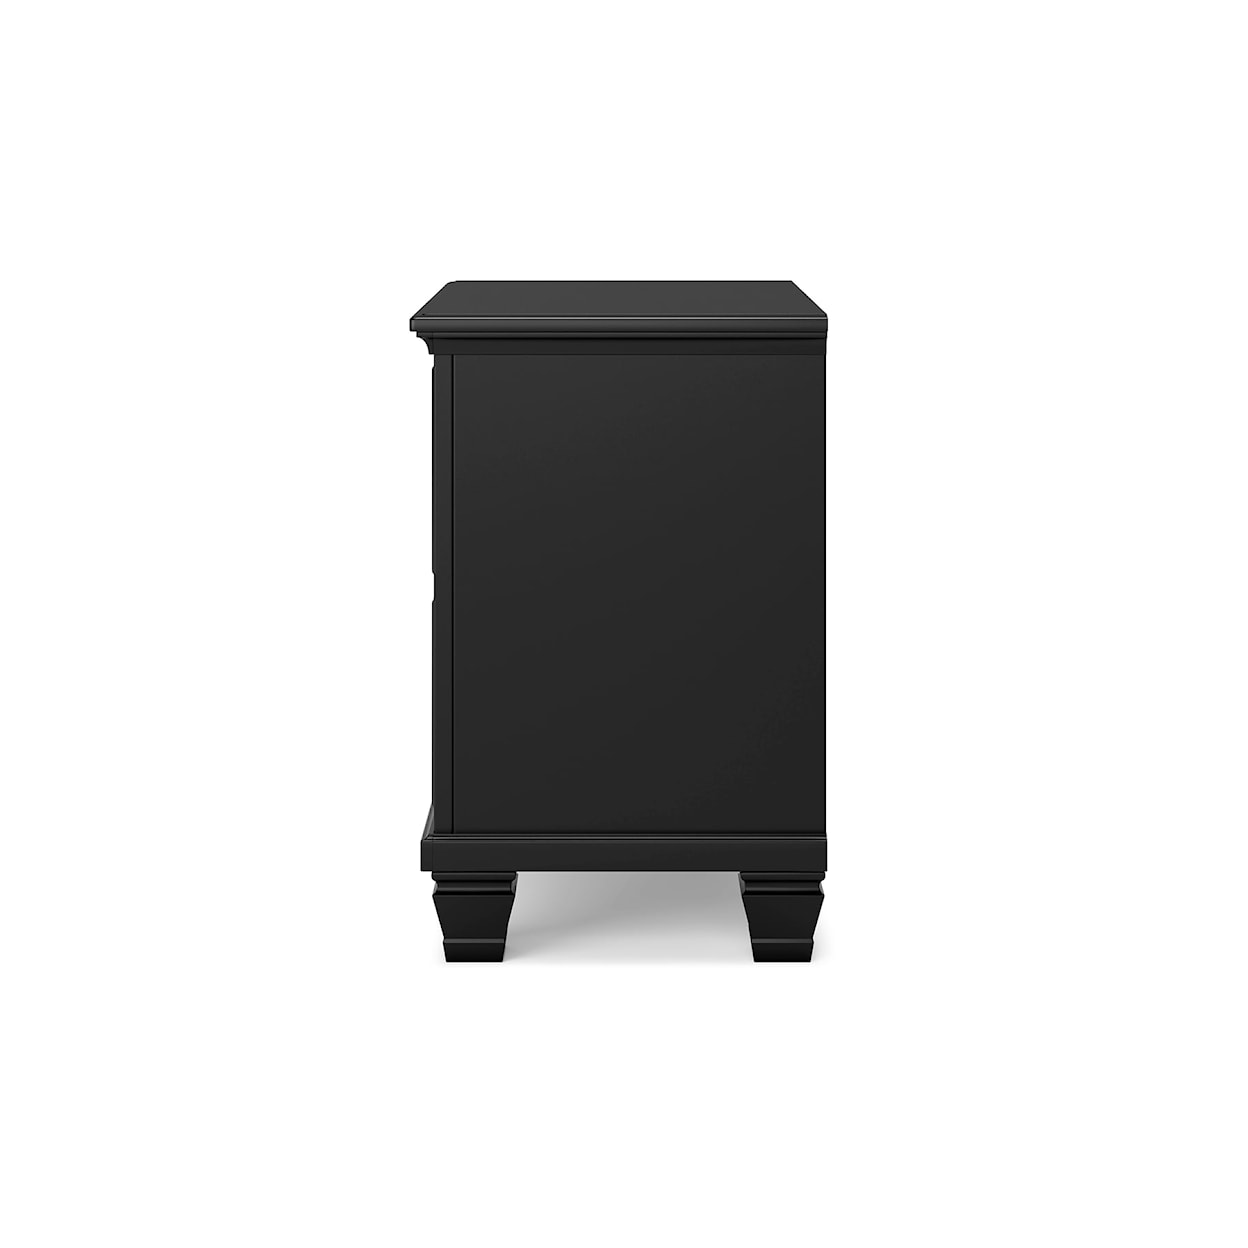 Signature Design by Ashley Lanolee 2-Drawer Nightstand